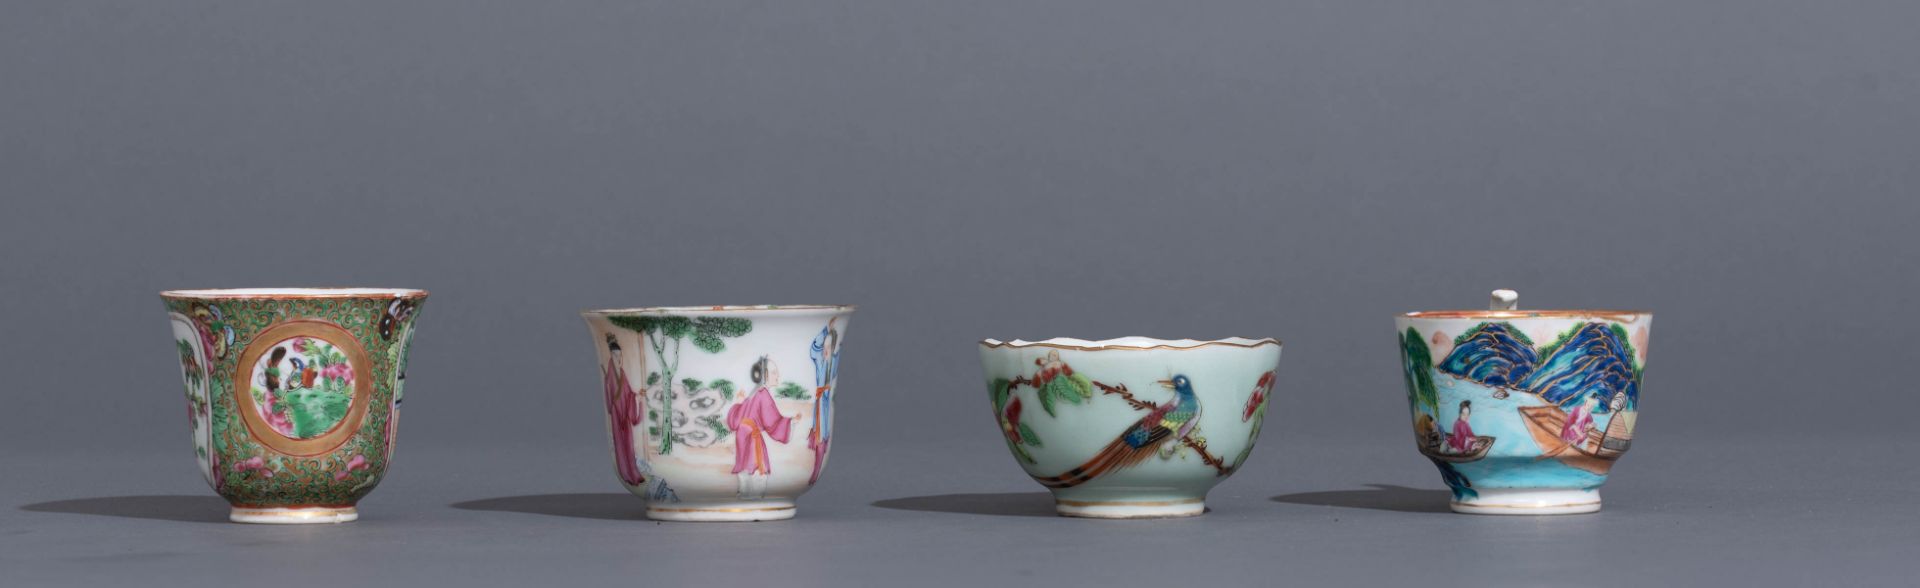 Six Chinese export porcelain Canton teacups and matching saucers - Image 24 of 62